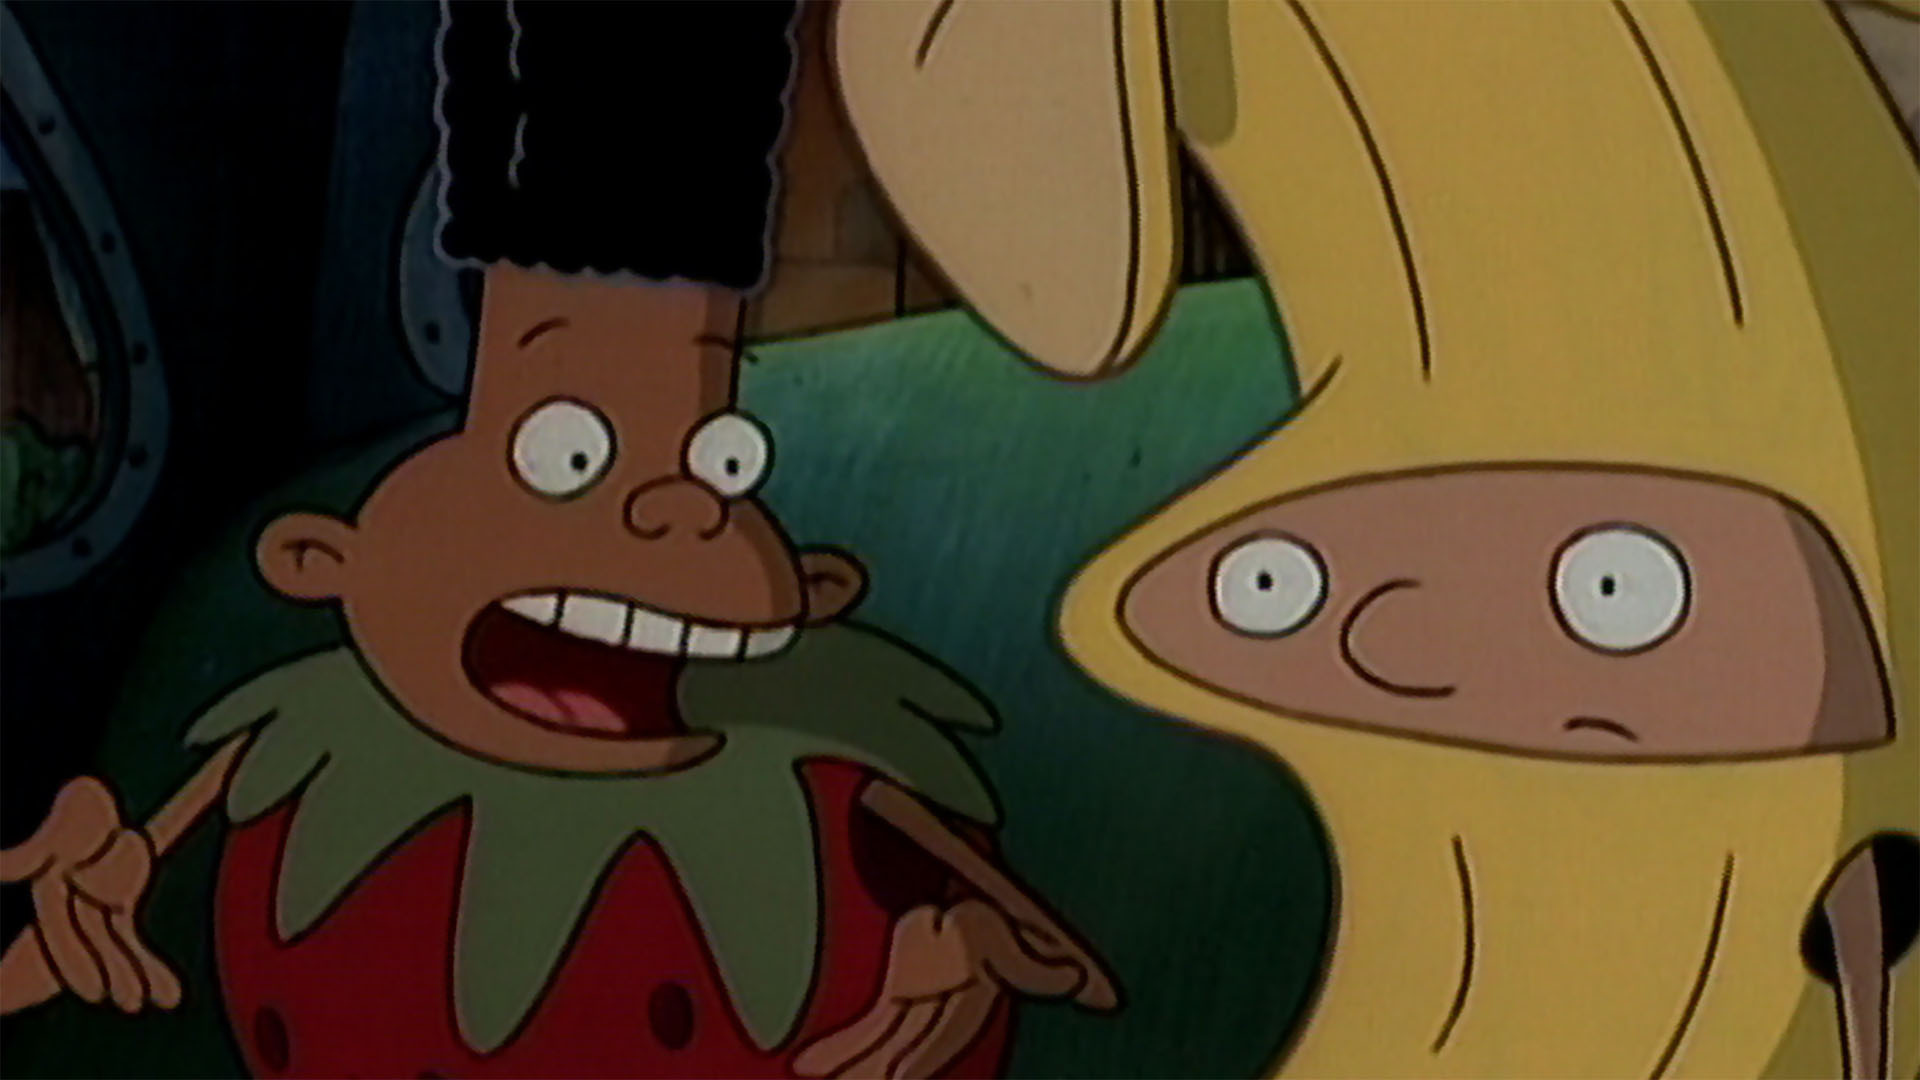 watch-hey-arnold-season-1-episode-1-downtown-as-fruits-eugene-s-bike-full-show-on-paramount-plus